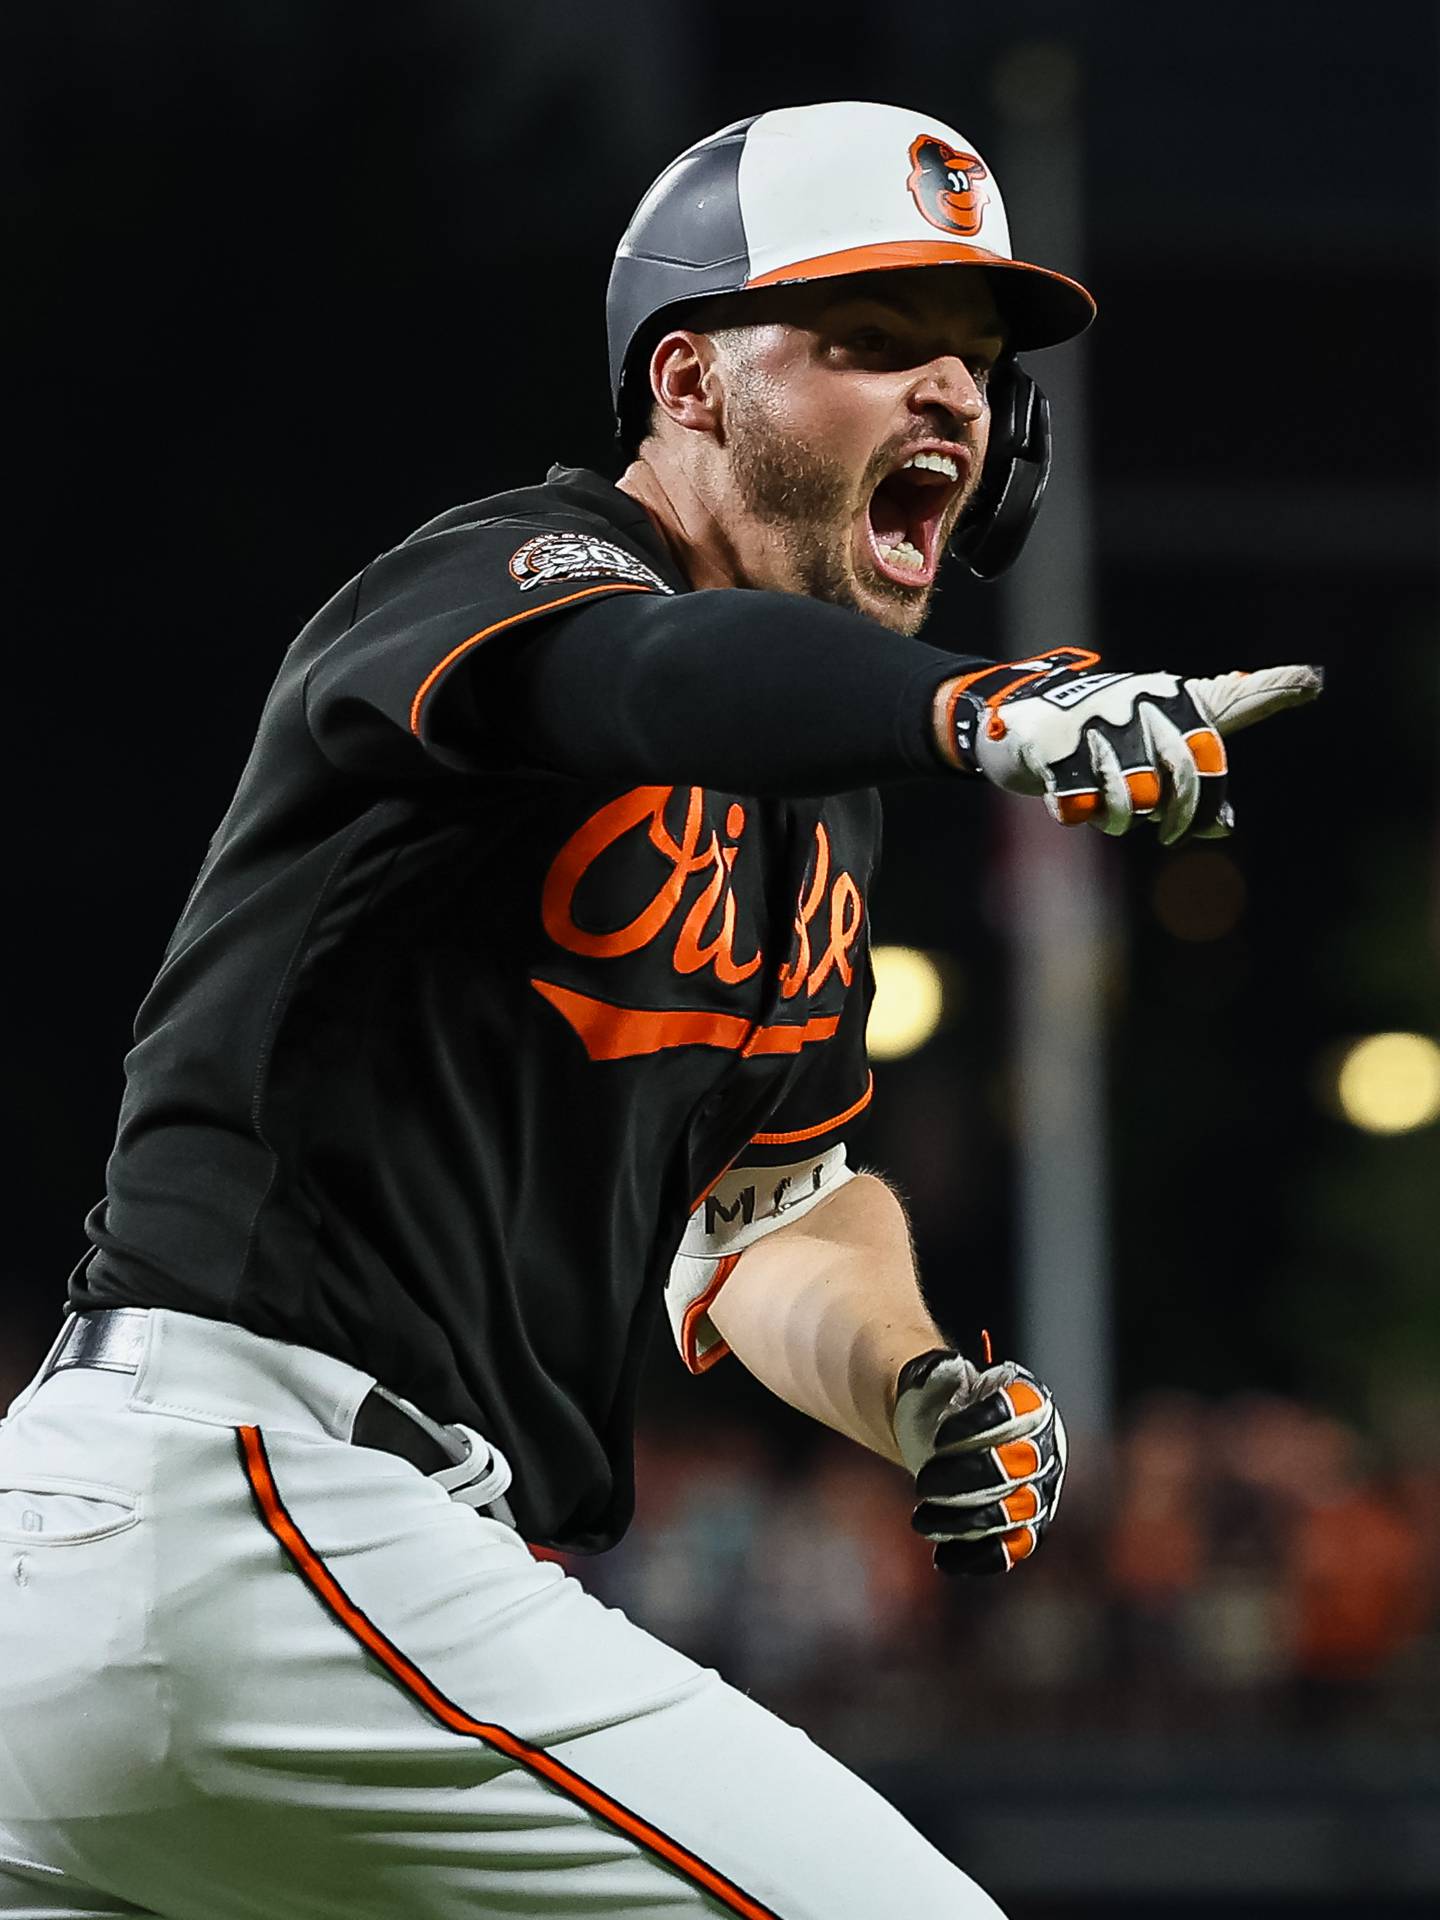 BALTIMORE, MD - JULY 08: Trey Mancini #16 of the Baltimore Orioles celebrates after hitting a walk off single against the Los Angeles Angels during the ninth inning at Oriole Park at Camden Yards on July 8, 2022 in Baltimore, Maryland. (Photo by Scott Taetsch/Getty Images)